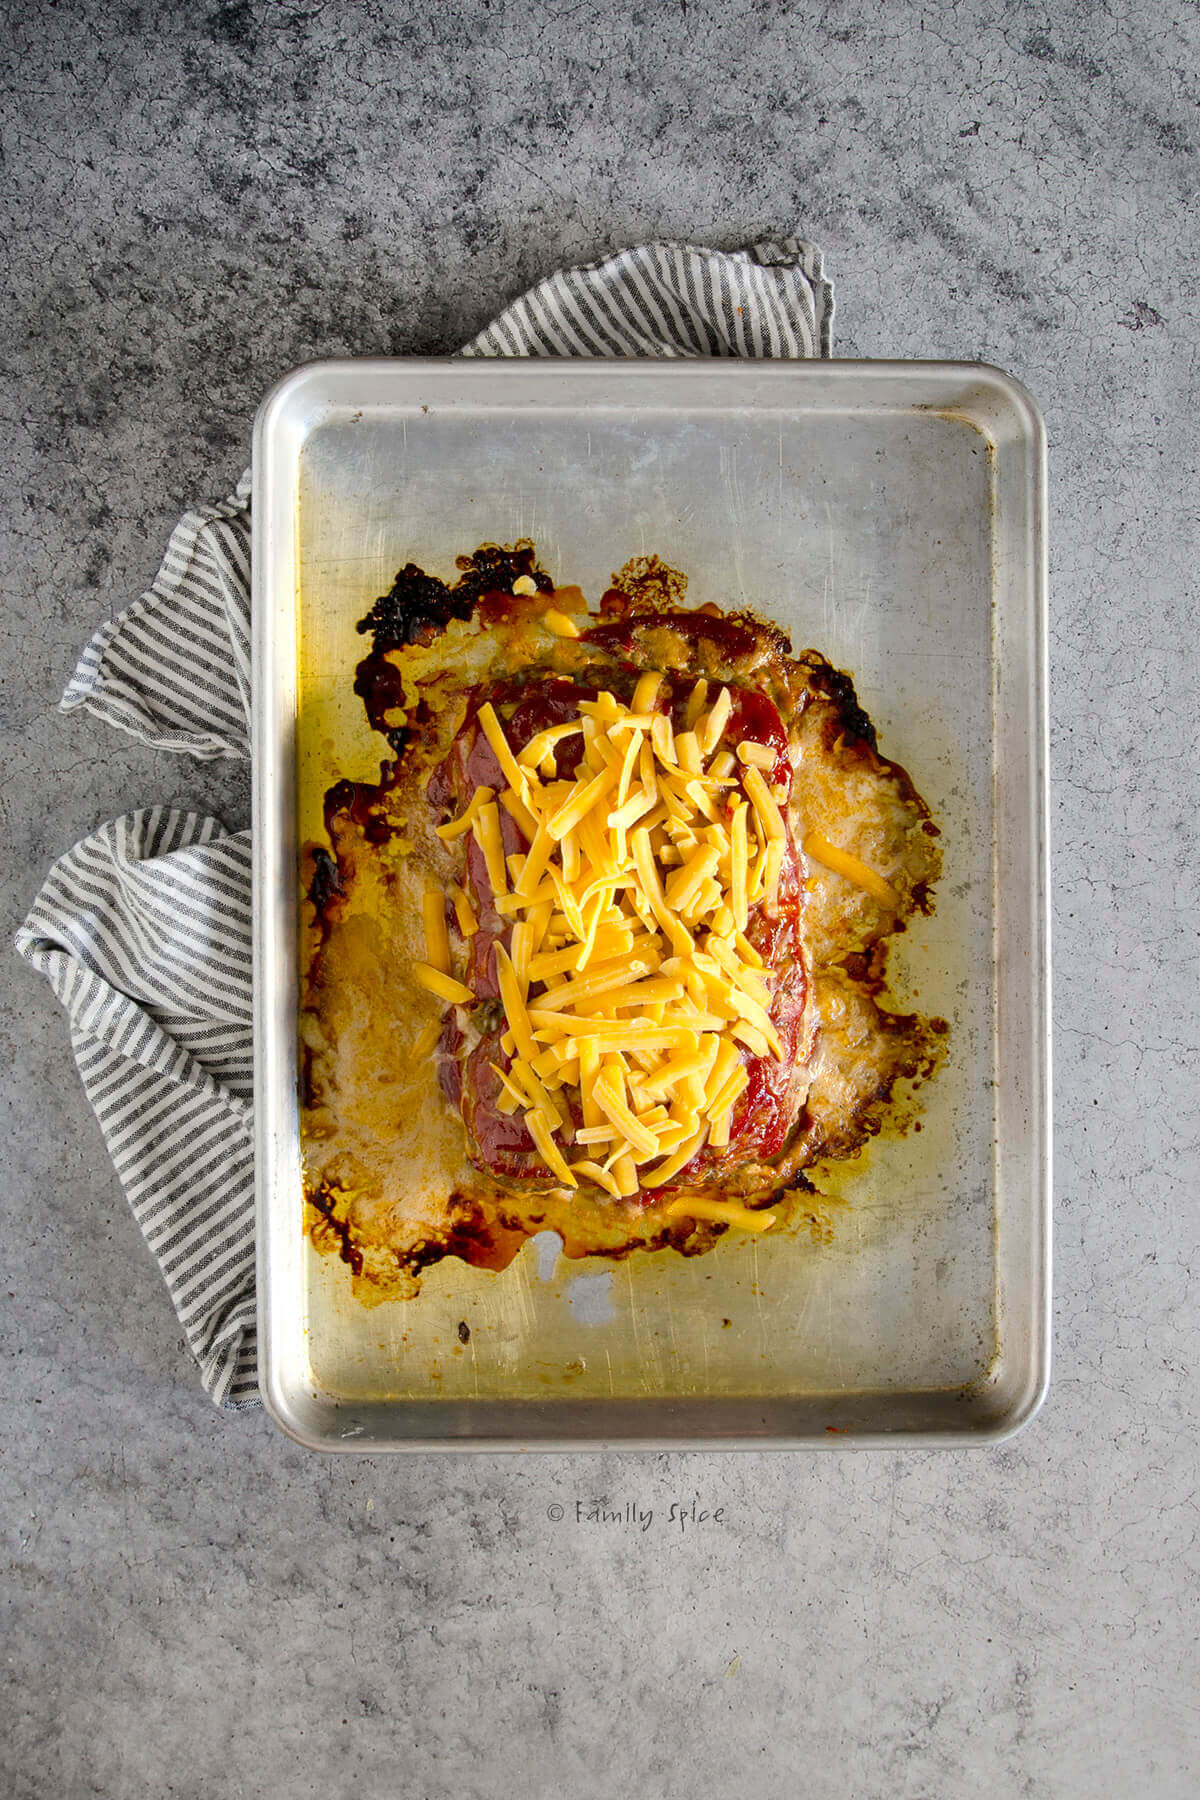 Shredded cheese topped on a freshly baked meatloaf on a baking sheet